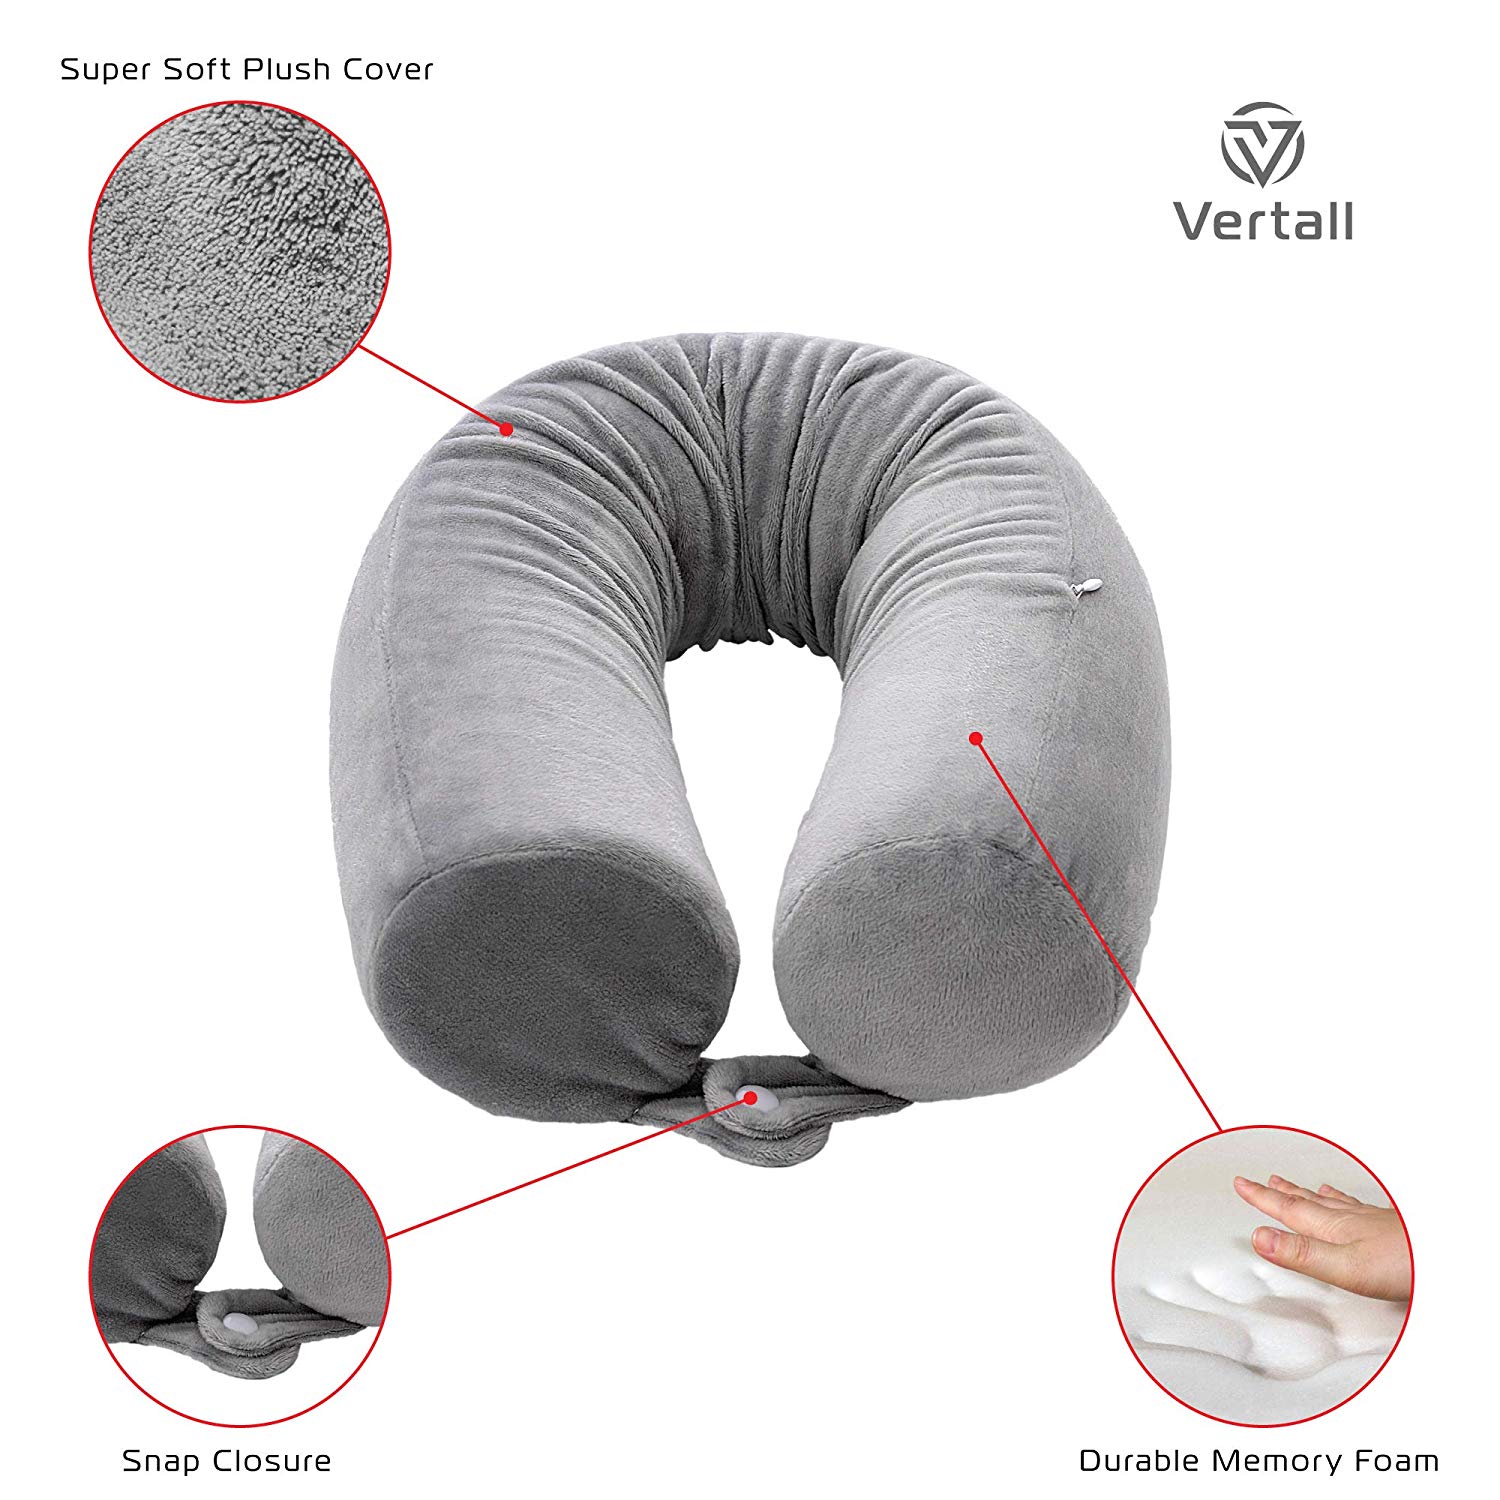 Travel Pillow Memory Foam Twist for Neck, Chin, Back, and Leg Support by Vertall - Comfortable, Lightweight and Adjustable with Machine Washable Cover -Gray - image 4 of 5